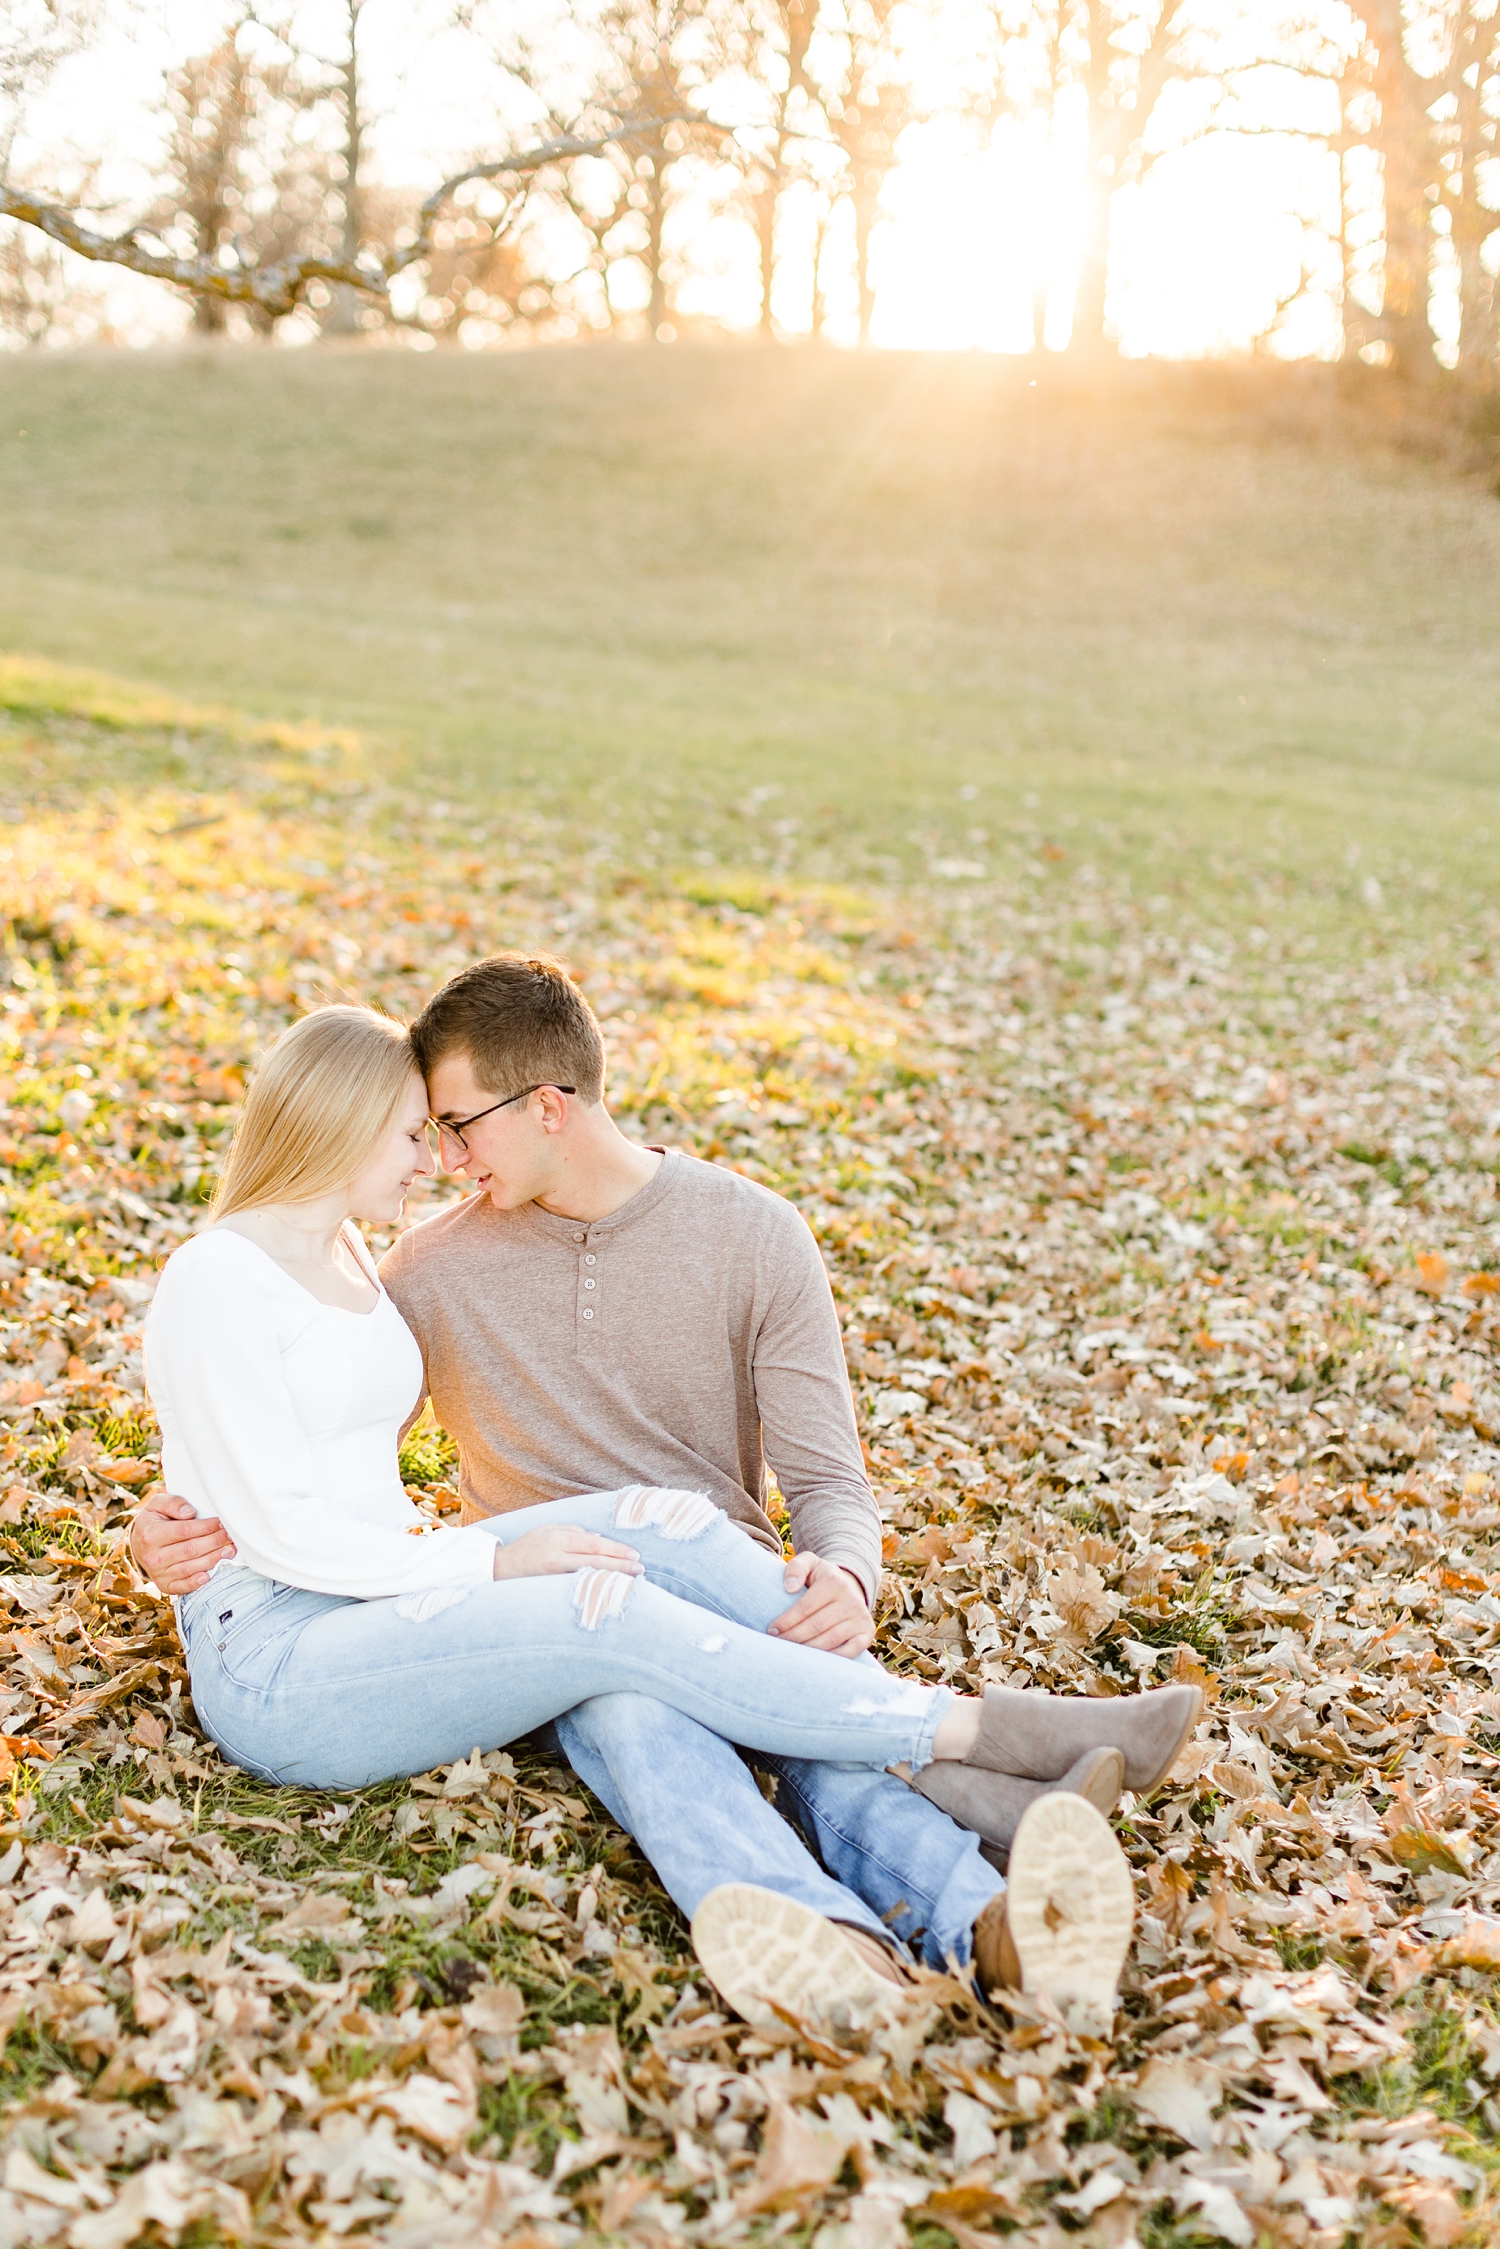 Alli and Quinton rest foreheads together while sitting in a grassy pasture full of leaves during sunset | CB Studio